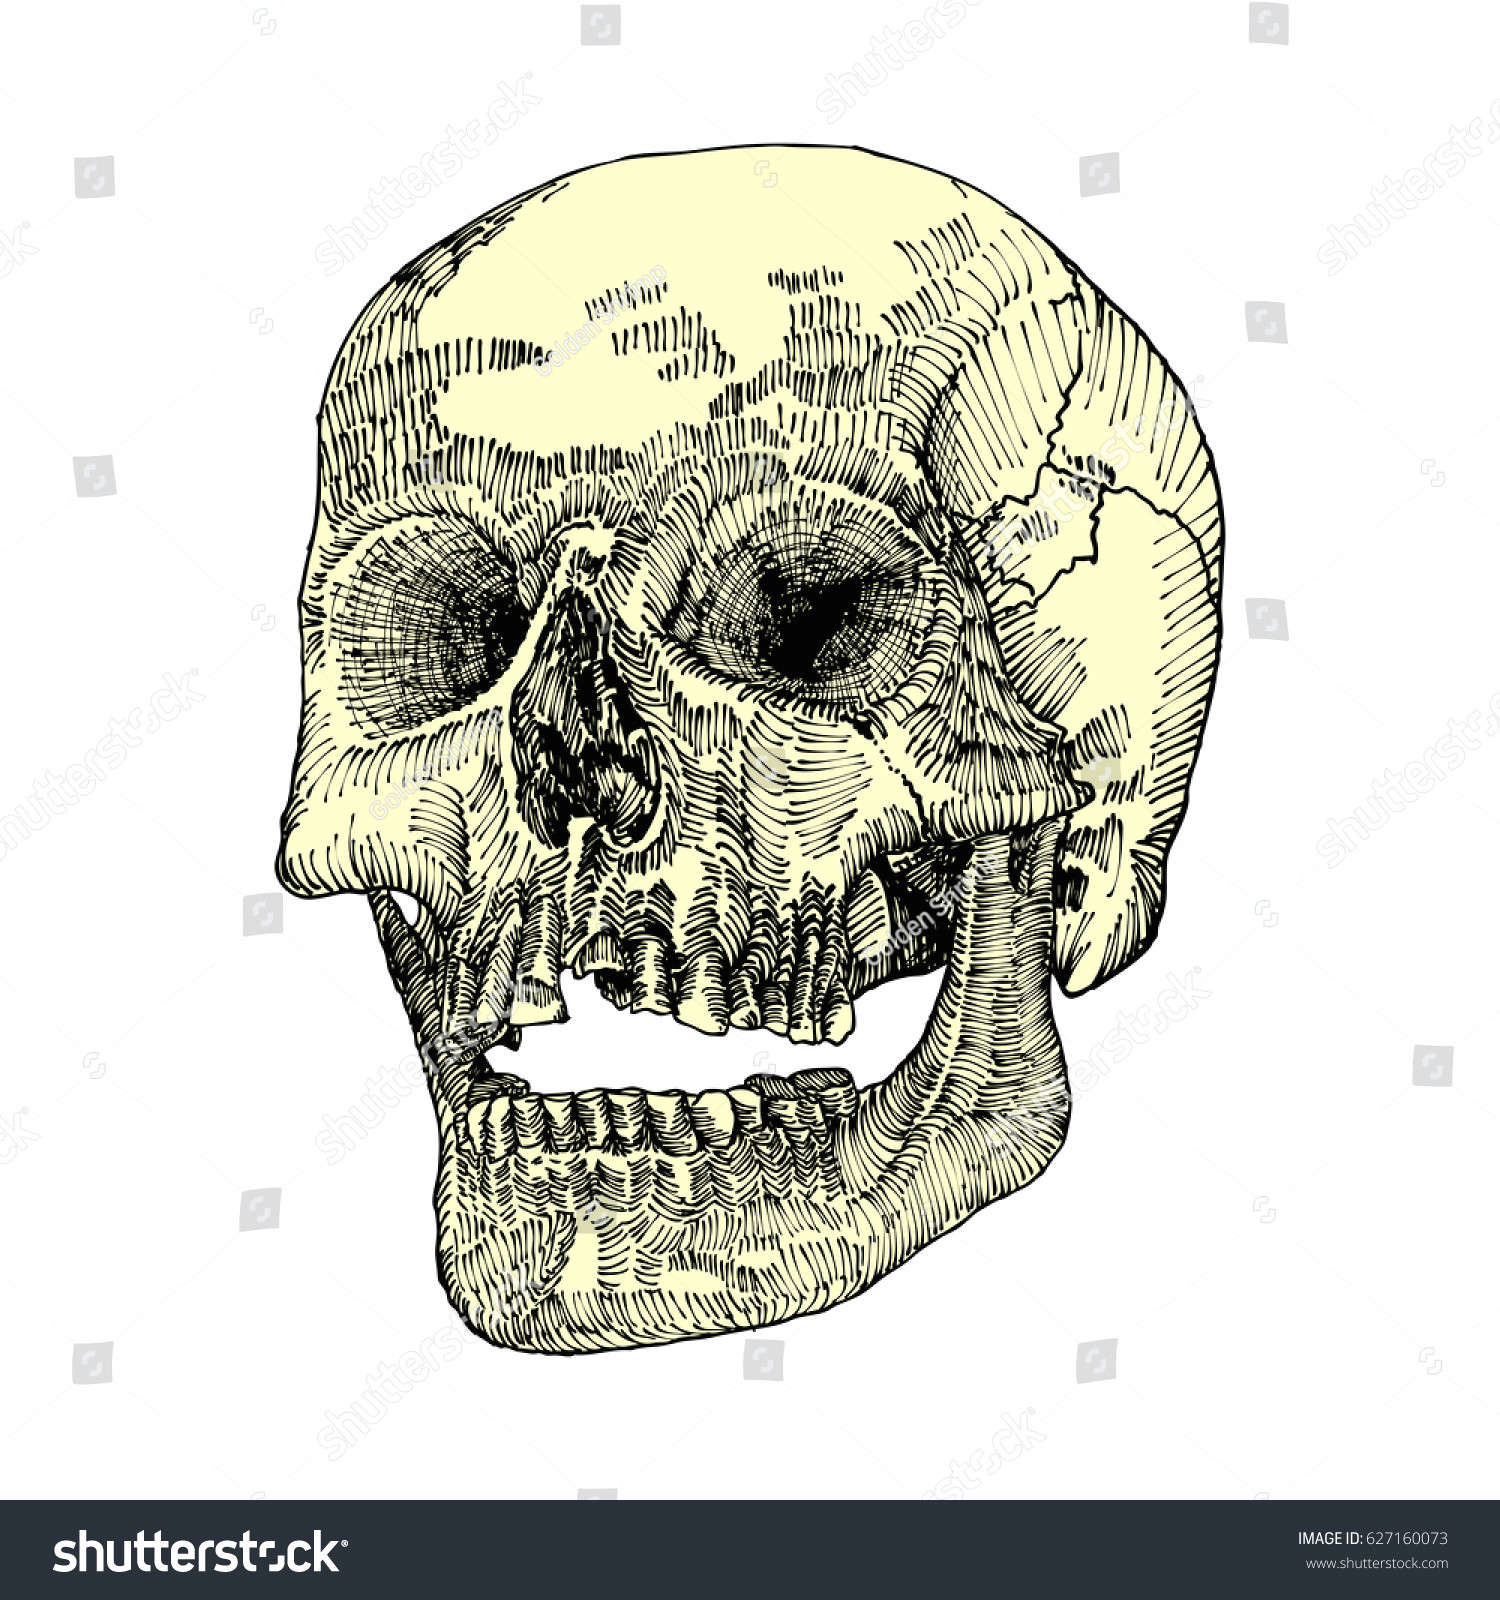 Skull without Jaw Drawing Royalty Free Stock Illustration Of Anatomic Skull Open Mouth Jaw